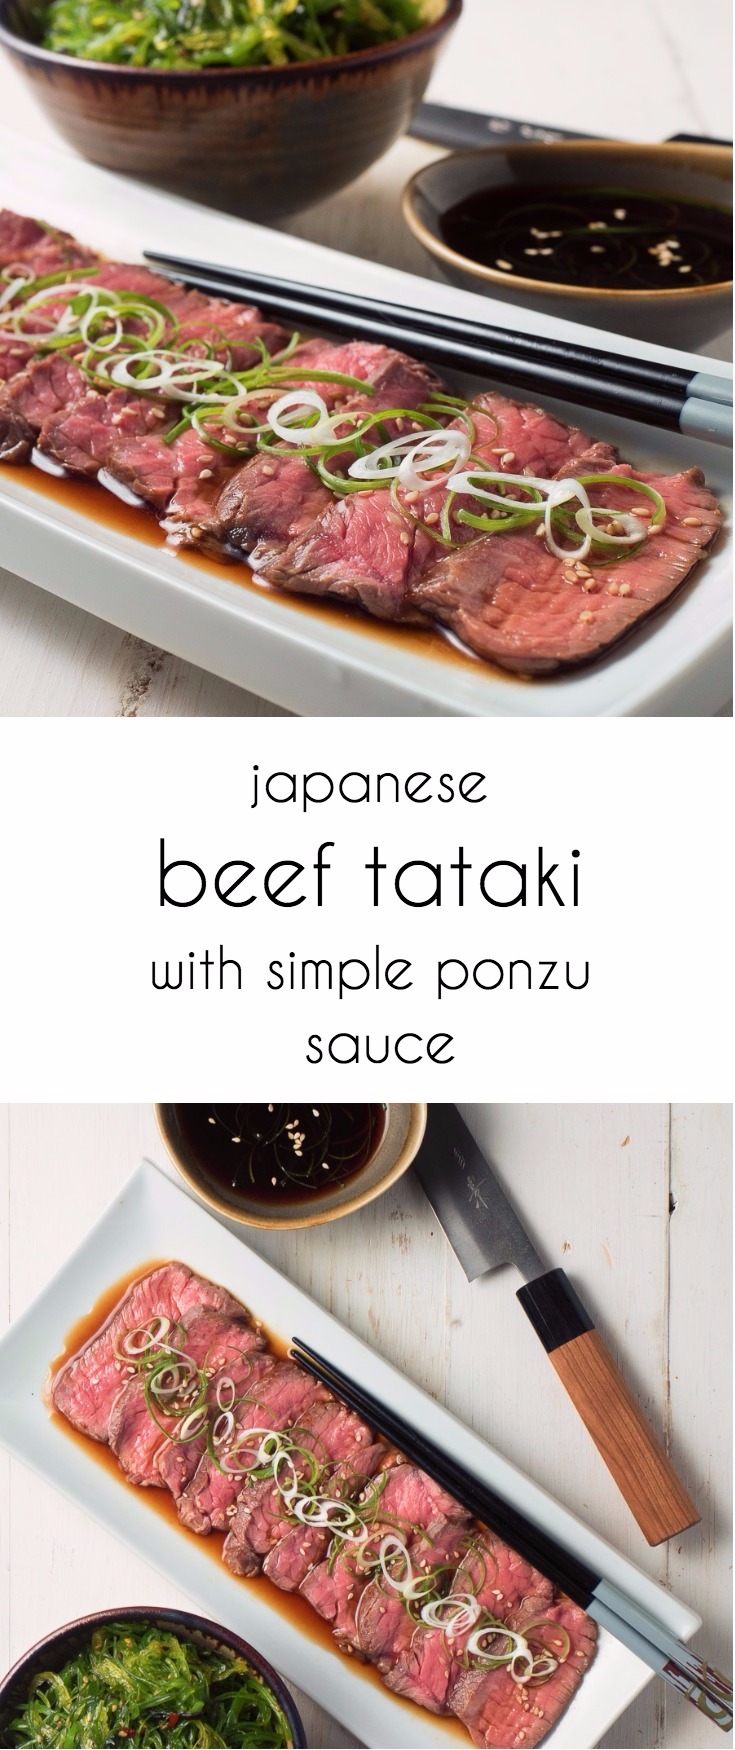 Japanese beef tataki with simple ponzu dipping sauce. Perfect every time.